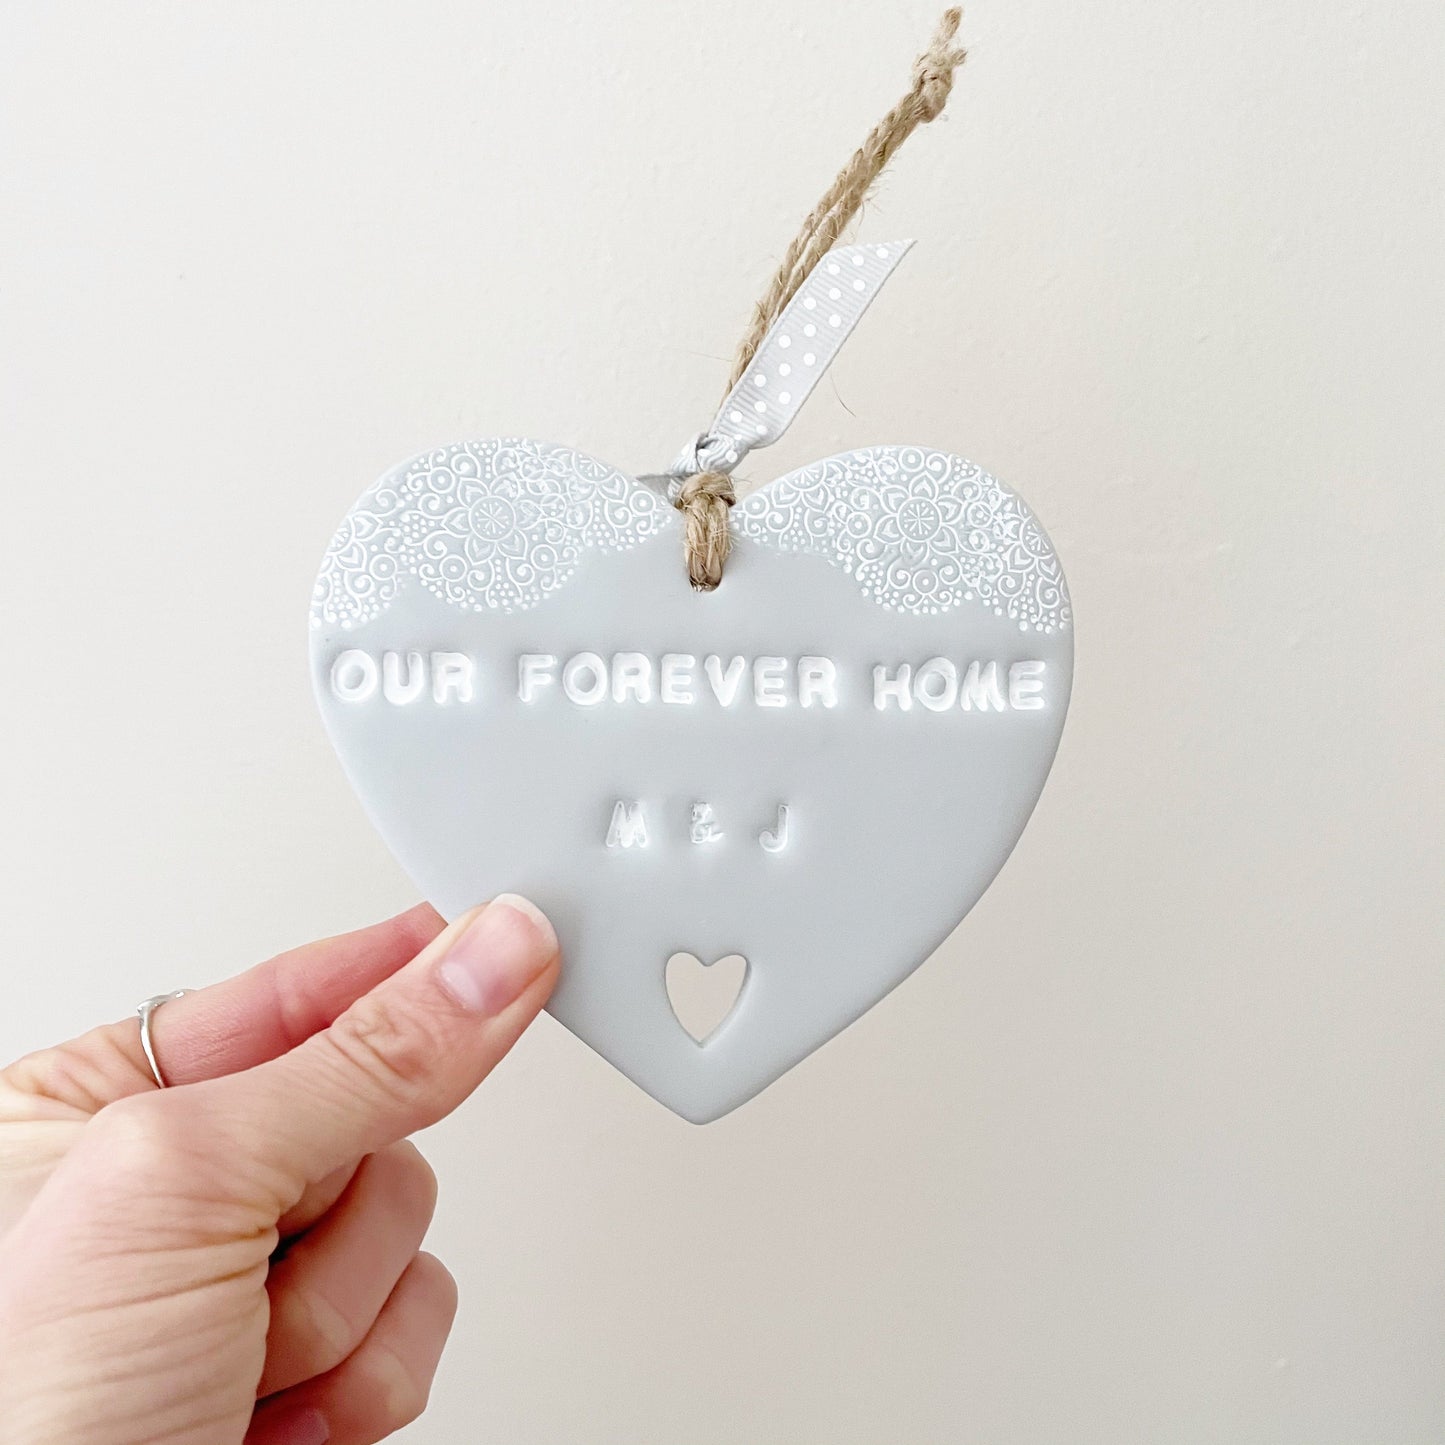 Personalised housewarming new home gift, grey clay heart with a white lace edge at the top of the heart and a heart cut out at the bottom with jute twine for hanging, the heart is personalised with OUR FOREVER HOME M & J